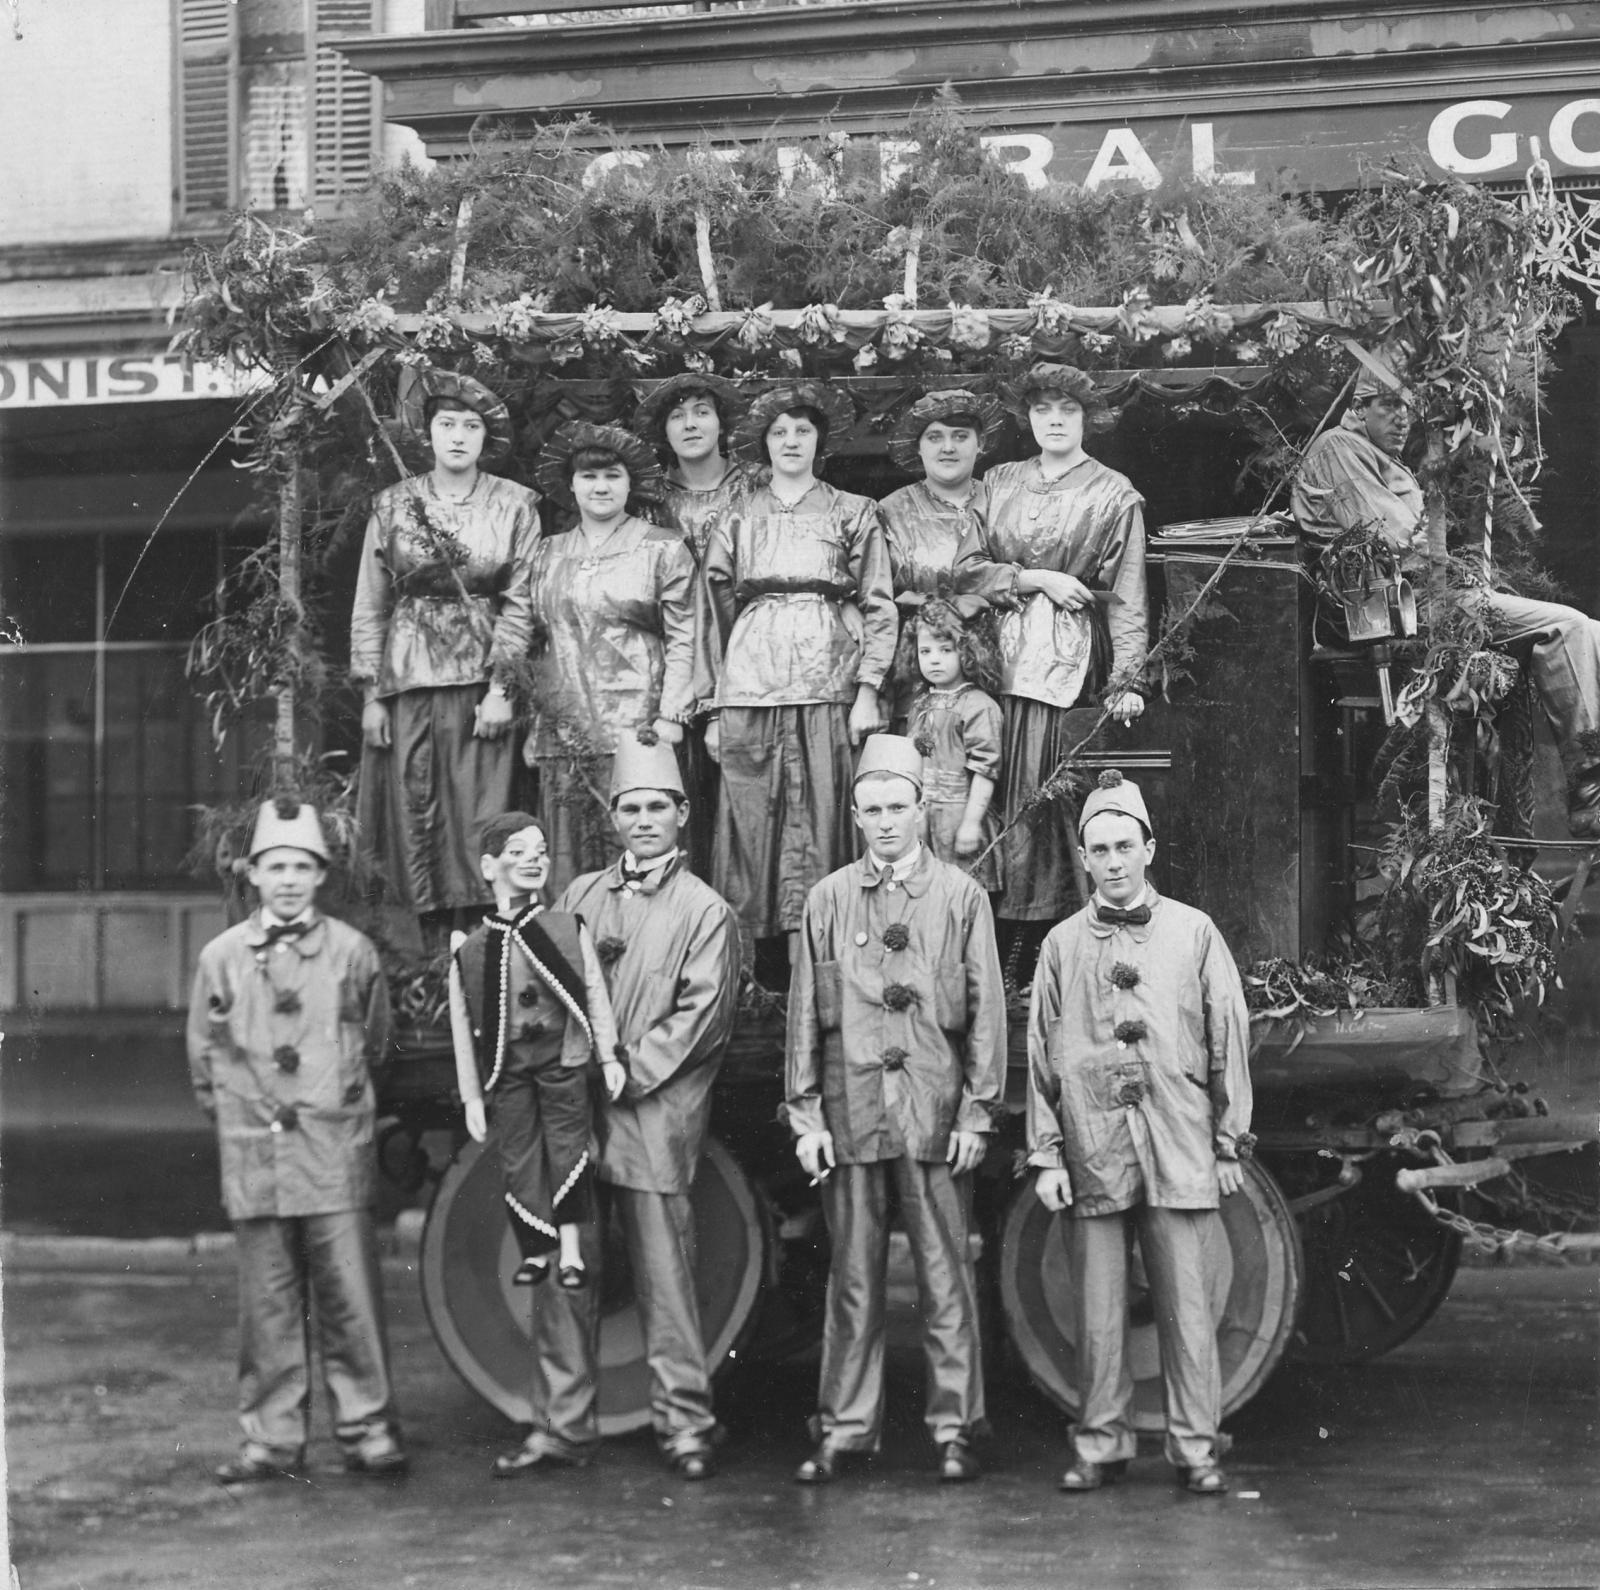 Members of a concert party group in Adelaide, c1922 [PRG 280/1/28/267]